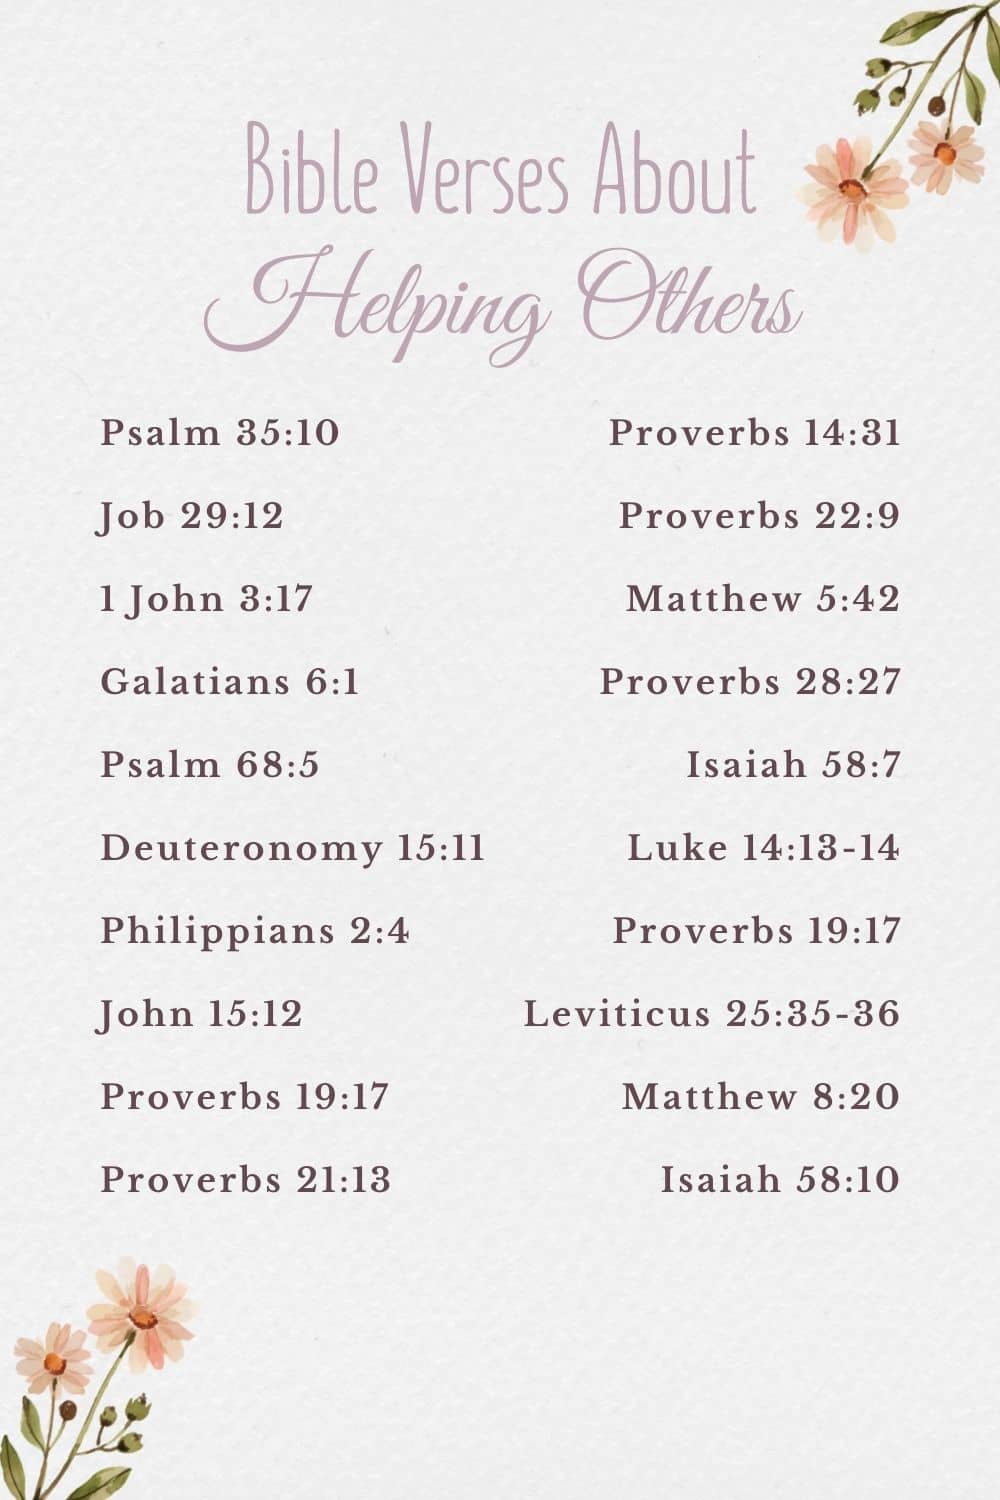 bible verses about helping the poor
bible verses about helping the homeless
bible verses about helping others